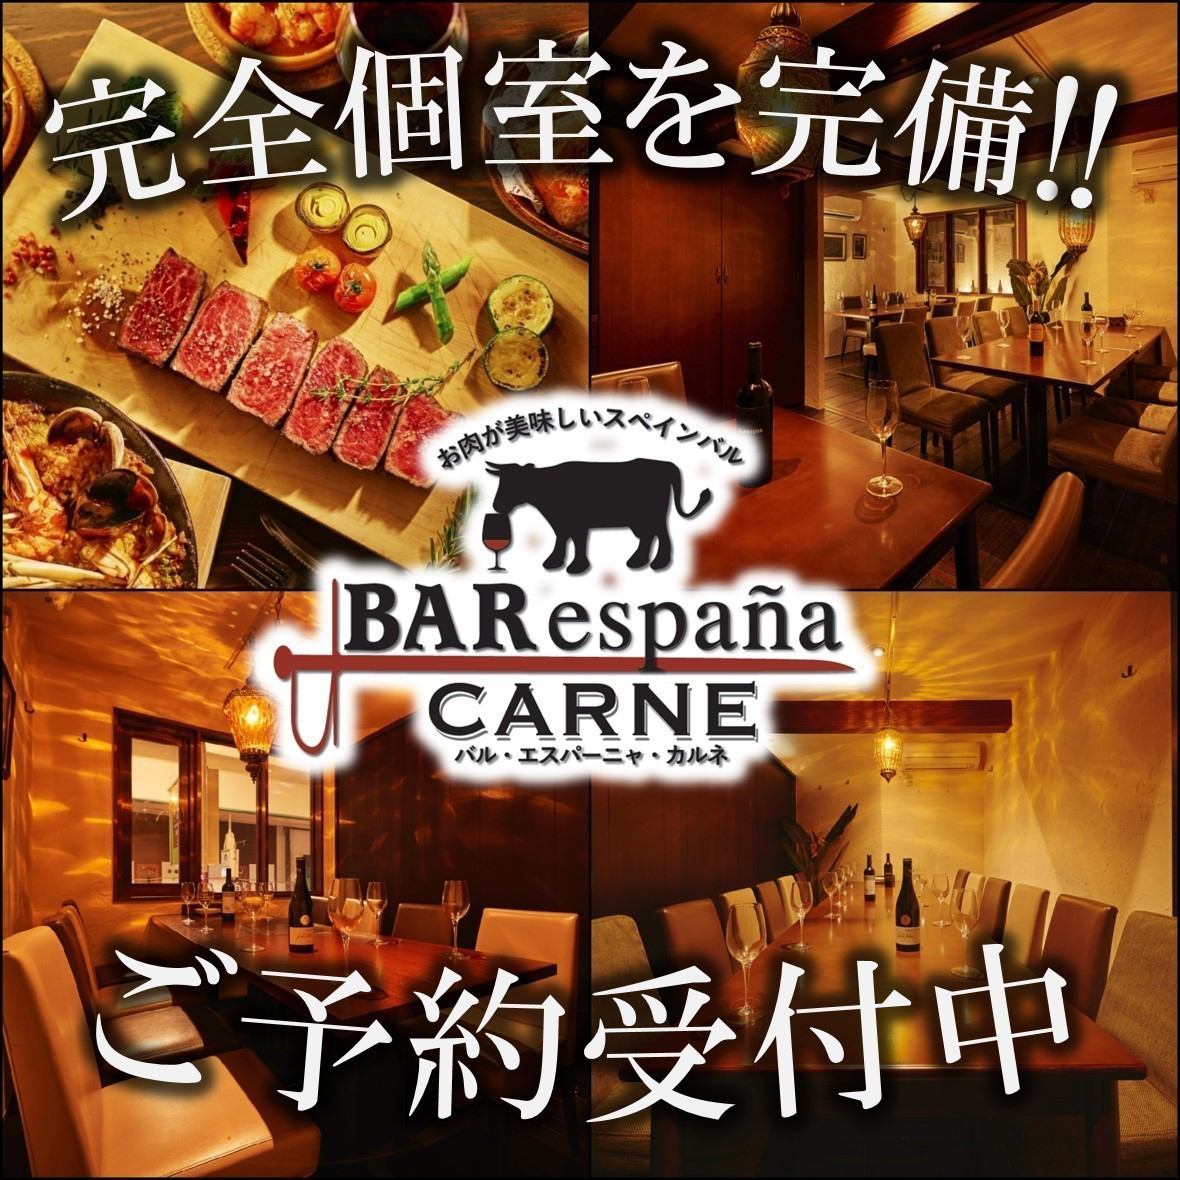 Enjoy [Japan's best paella] and [authentic charcoal-grilled steak] ♪ Authentic Spanish bar with private room space